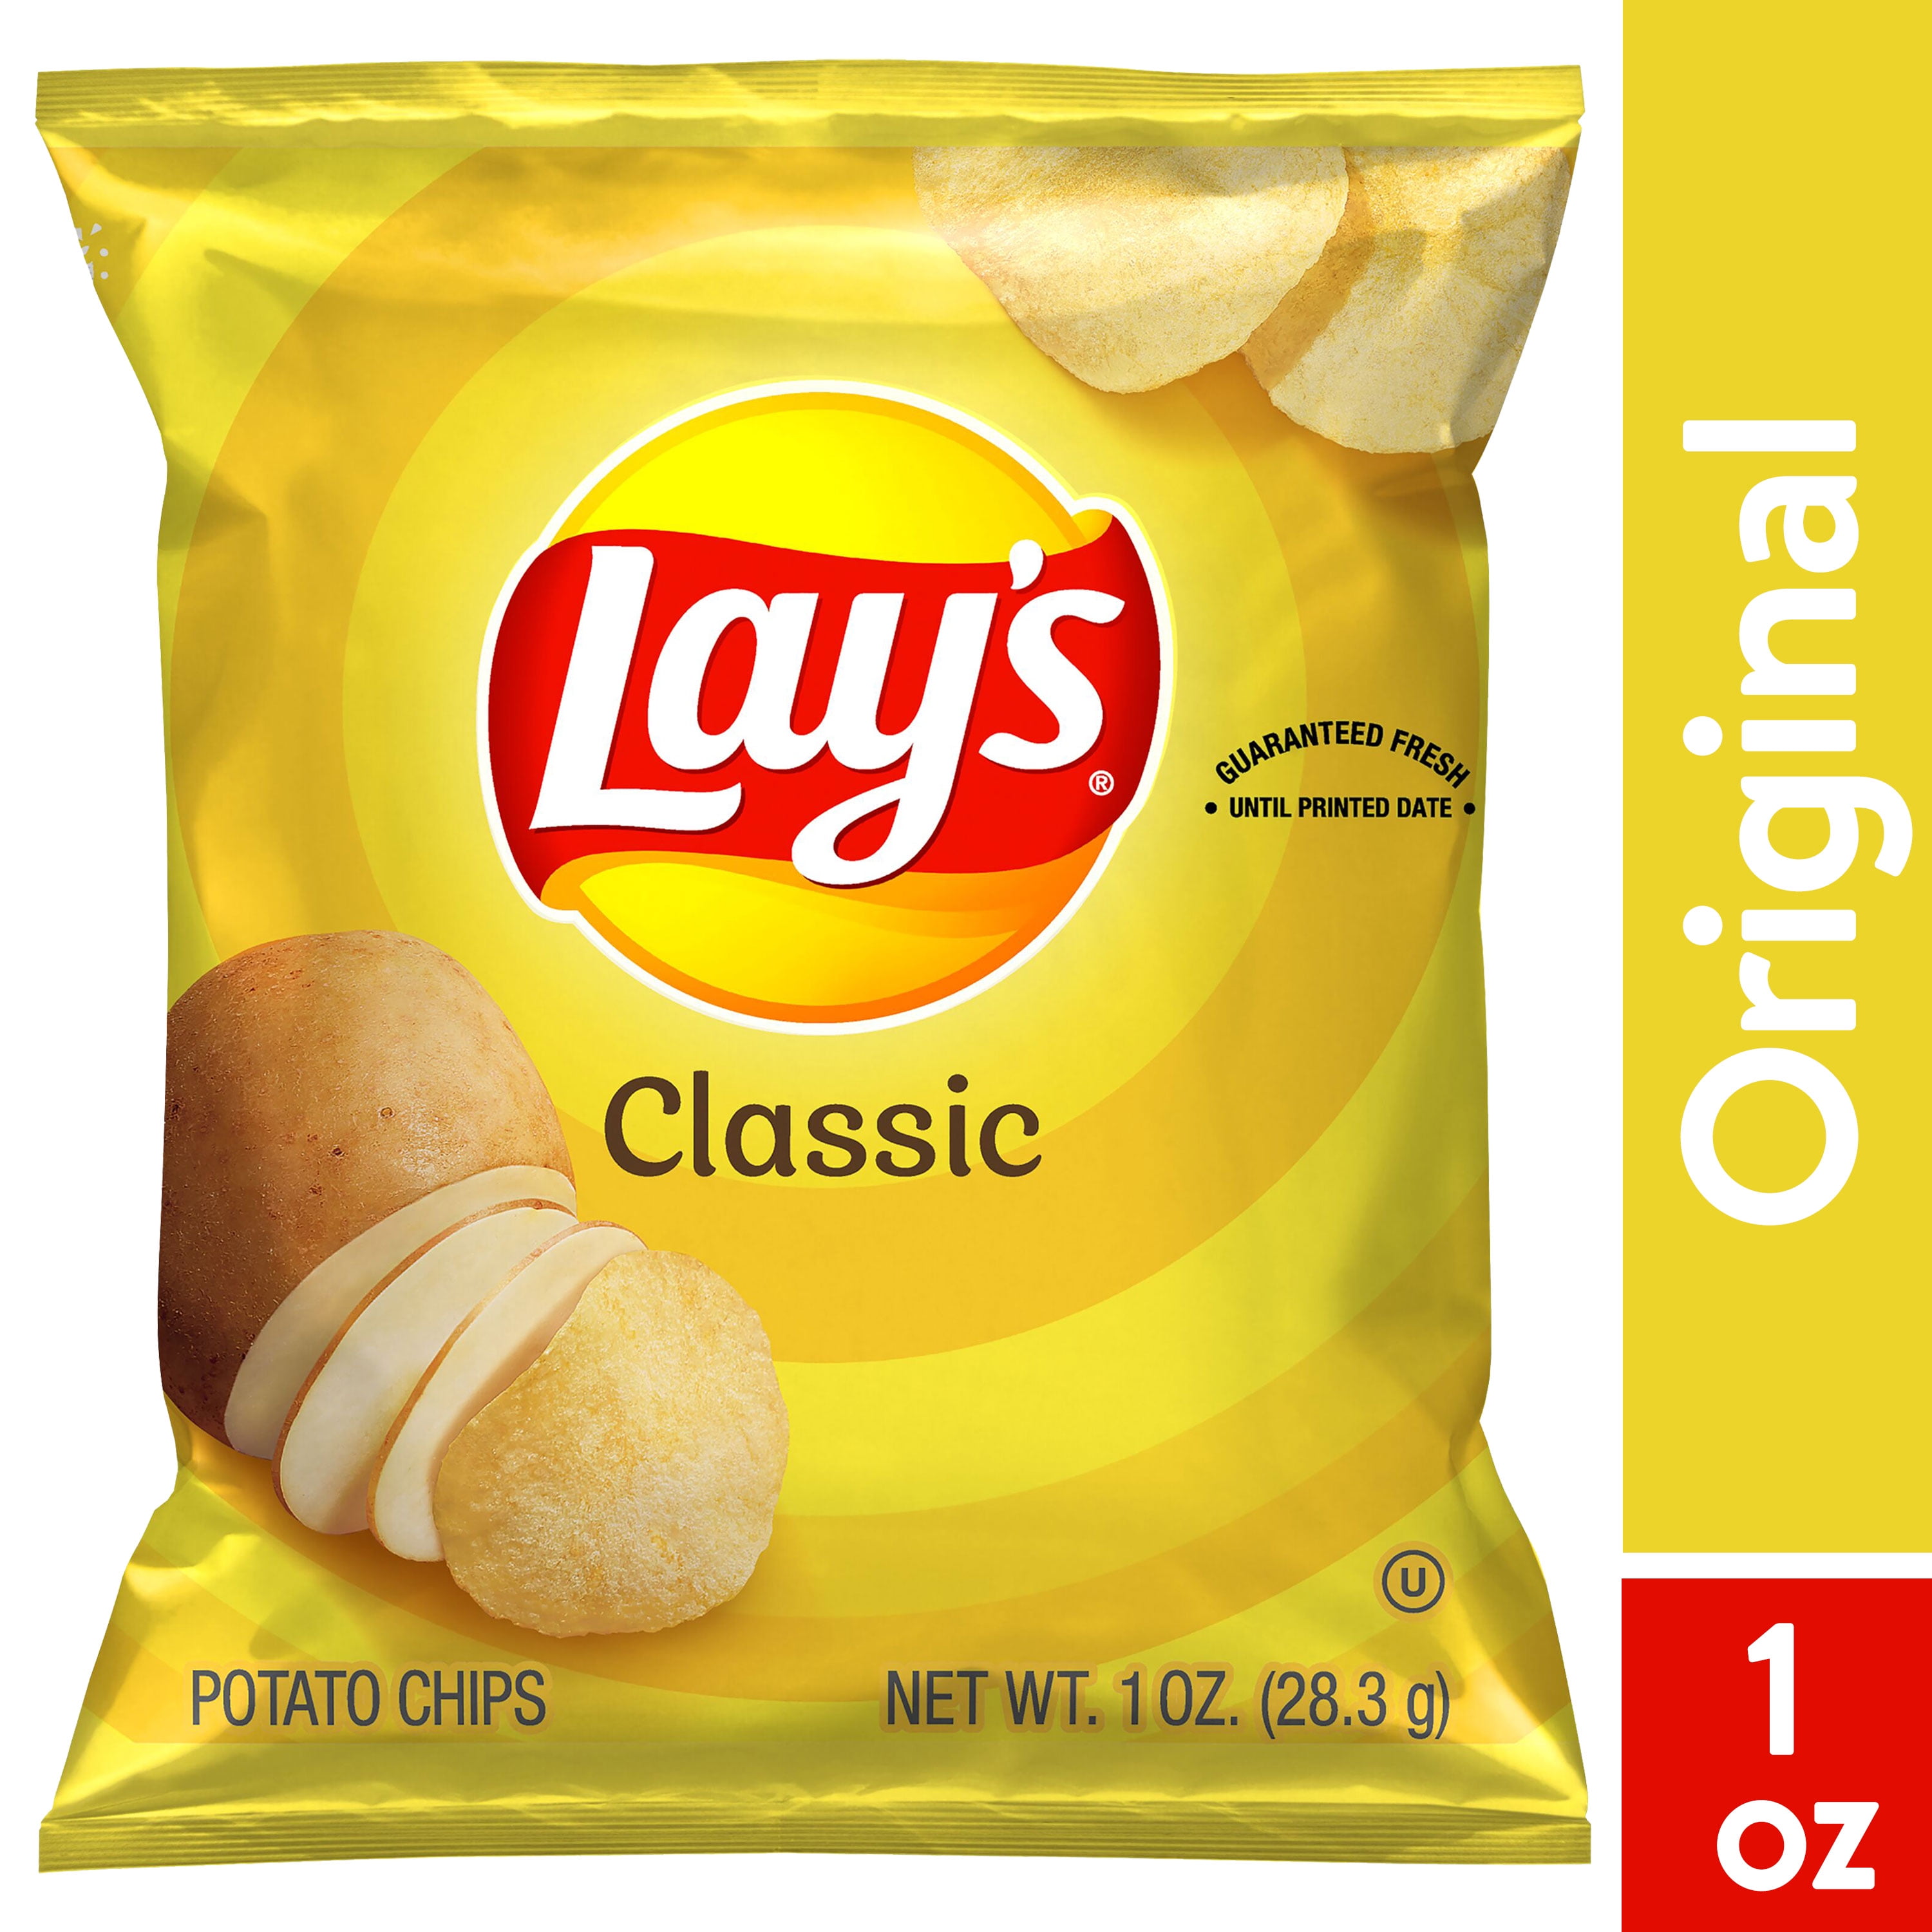 1:12 Scale Dollhouse Miniature Lay's Sour Cream and Onion Potato Chips